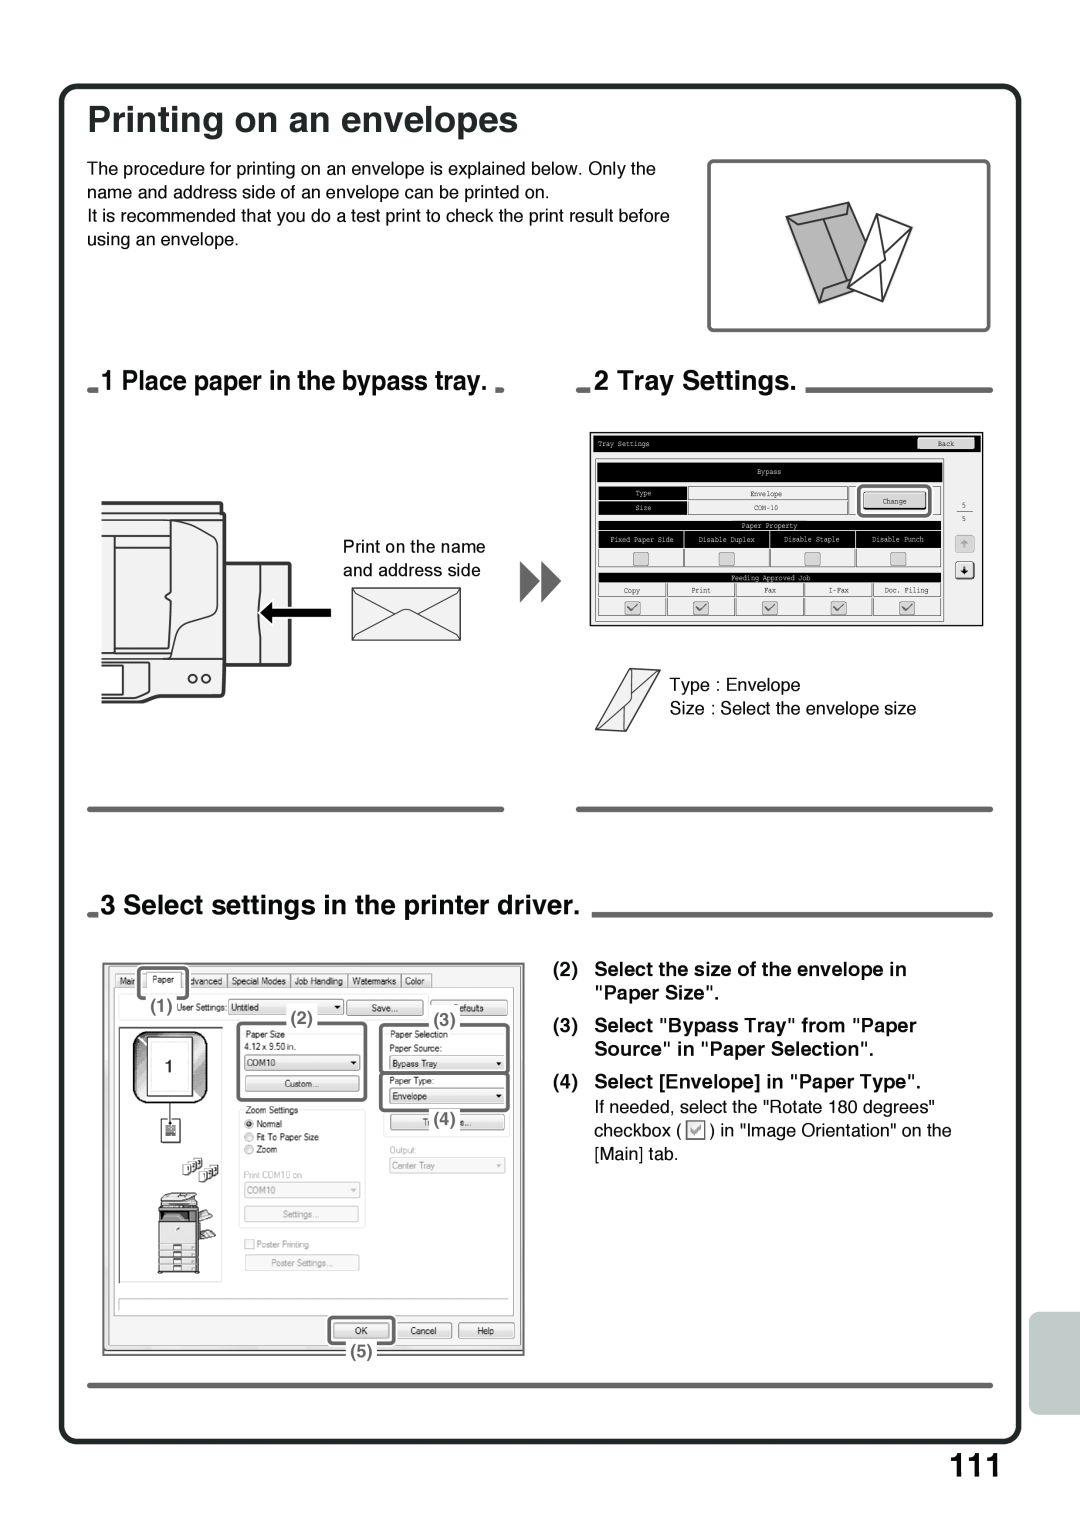 Sharp MX-5000N Printing on an envelopes, Place paper in the bypass tray, Tray Settings, Select Envelope in Paper Type 